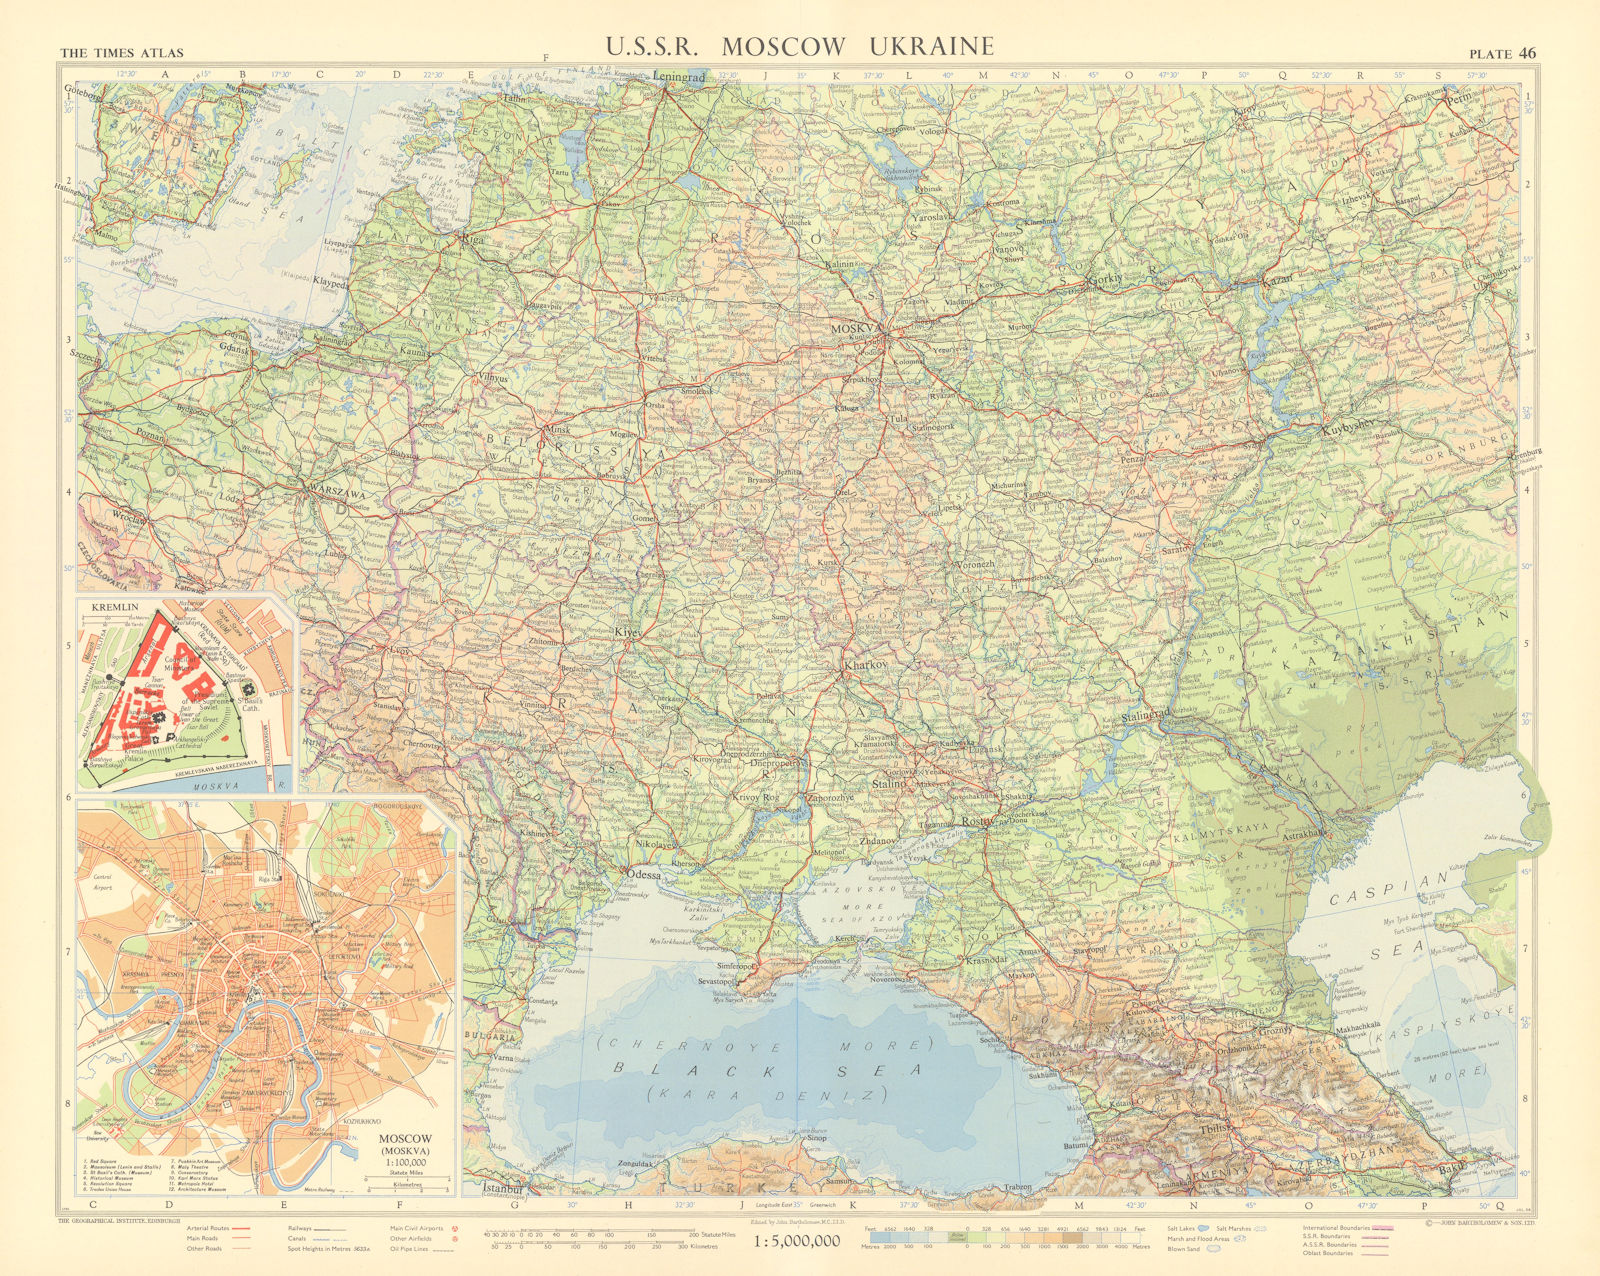 Associate Product Southwest Russia & Ukraine. USSR. Moscow & Kremlin plans. TIMES 1959 old map